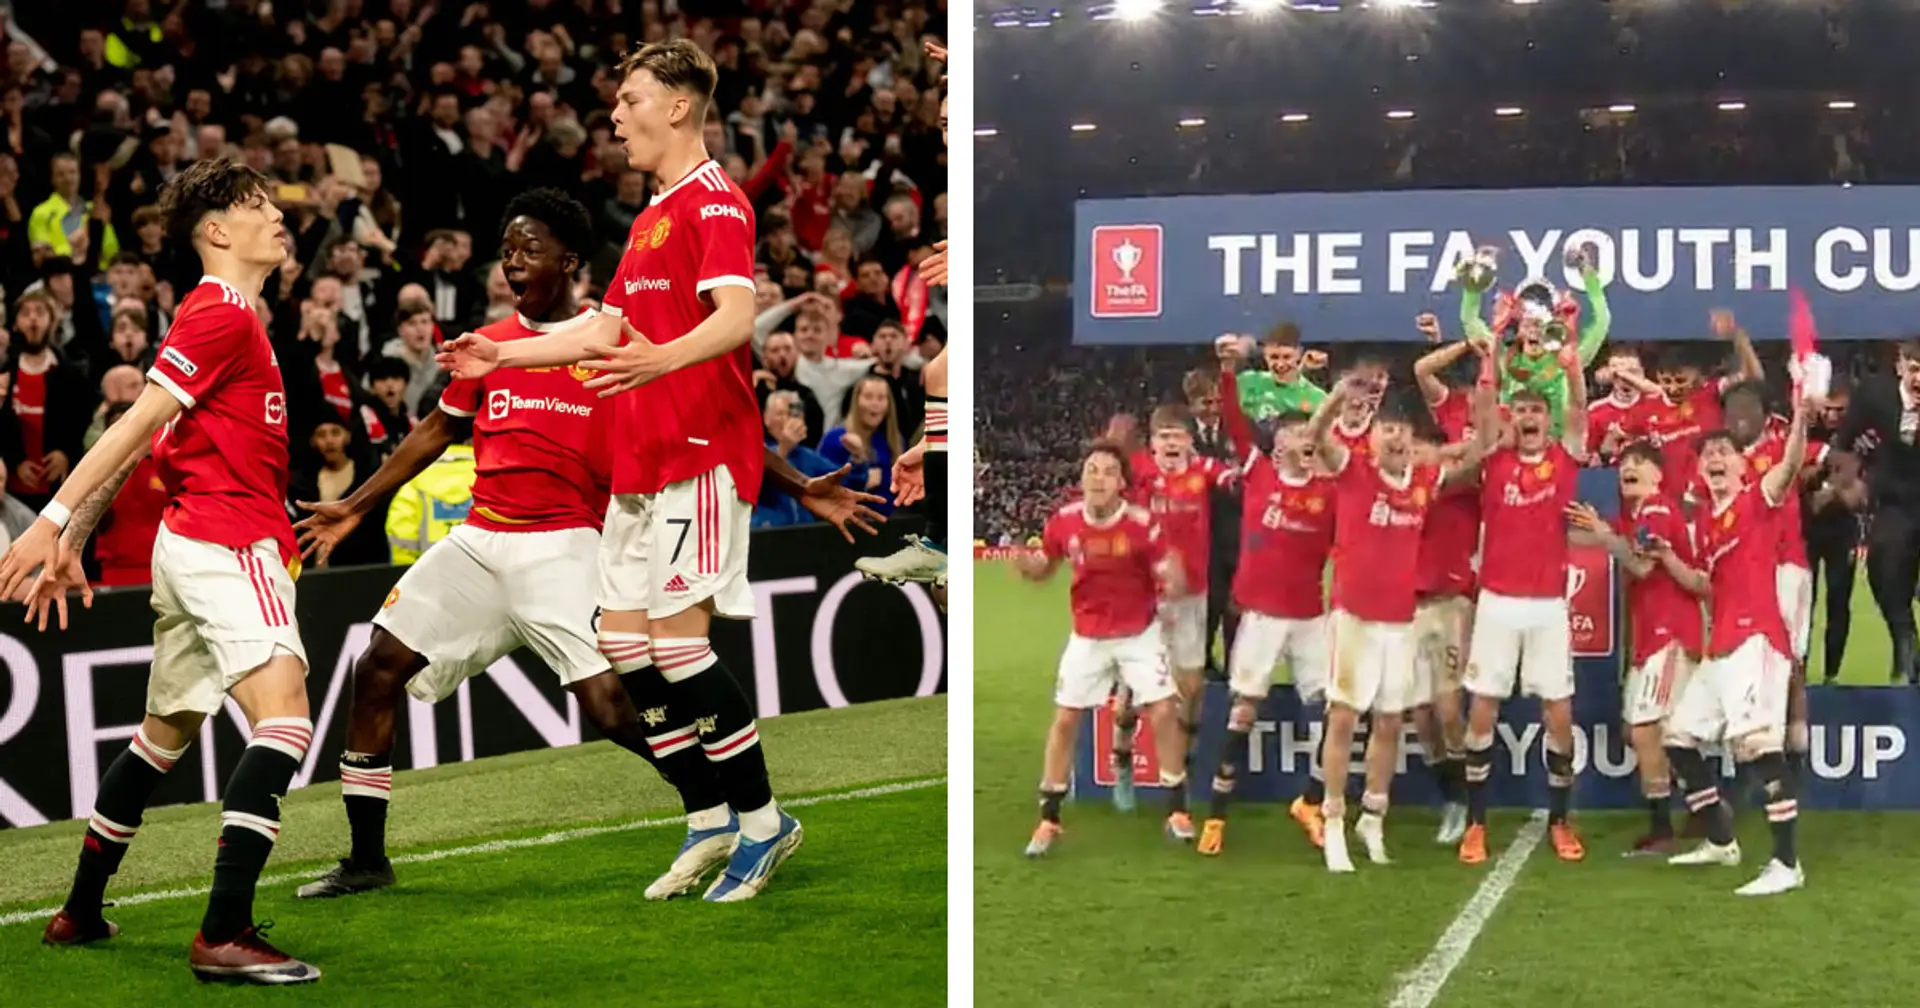 Man United U18s win FA Youth Cup final after hard-fought win over Nottingham Forest